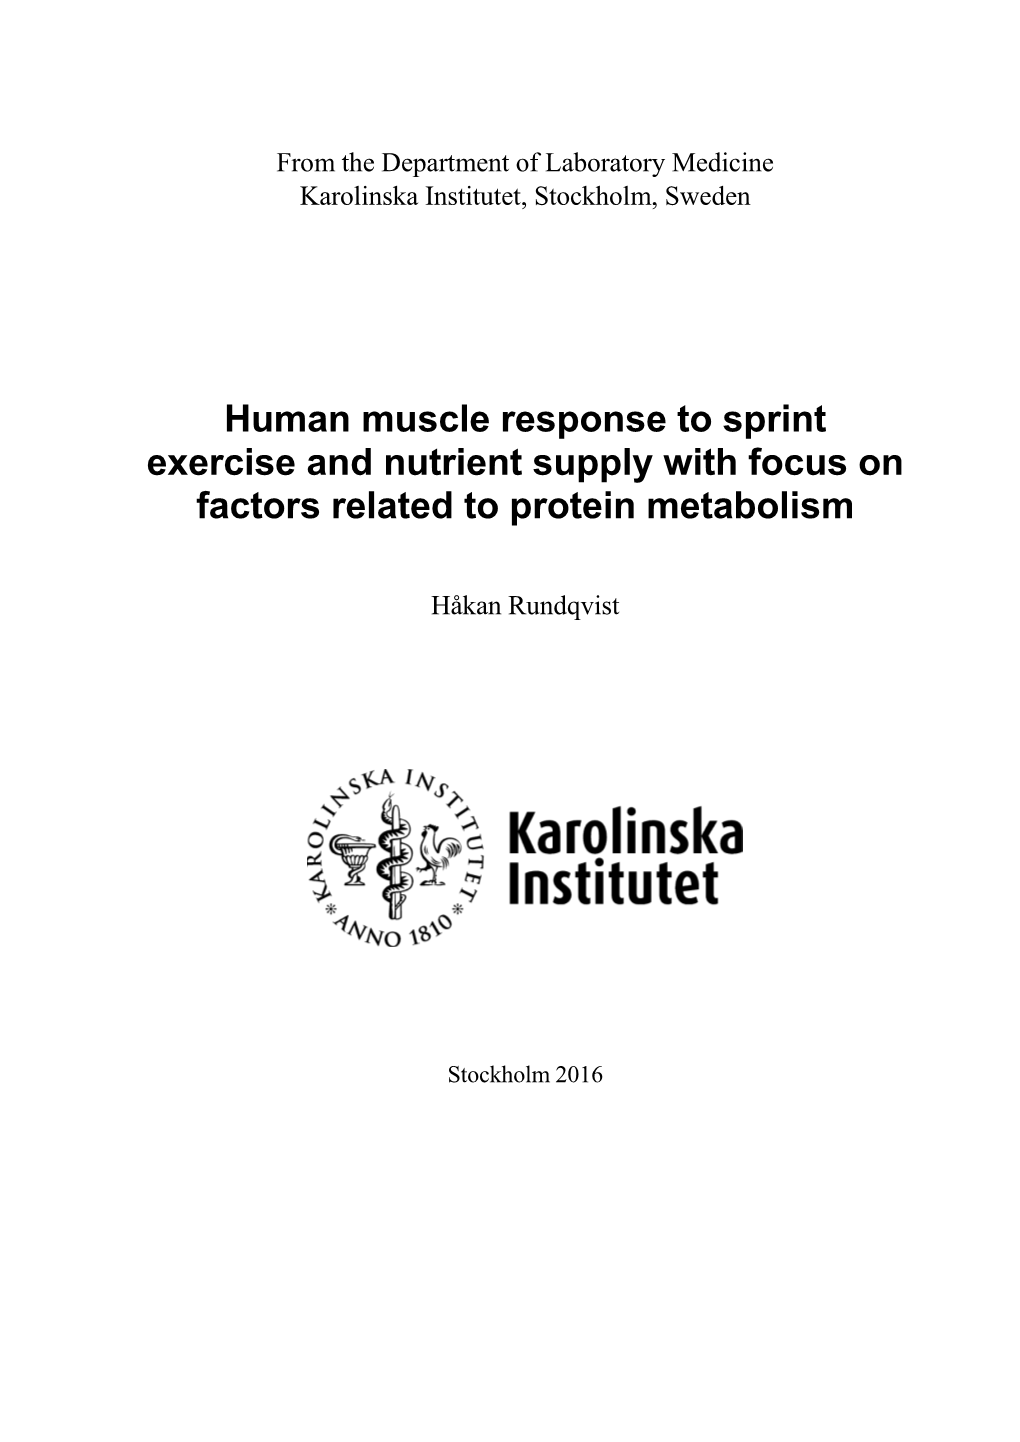 Human Muscle Response to Sprint Exercise and Nutrient Supply with Focus on Factors Related to Protein Metabolism